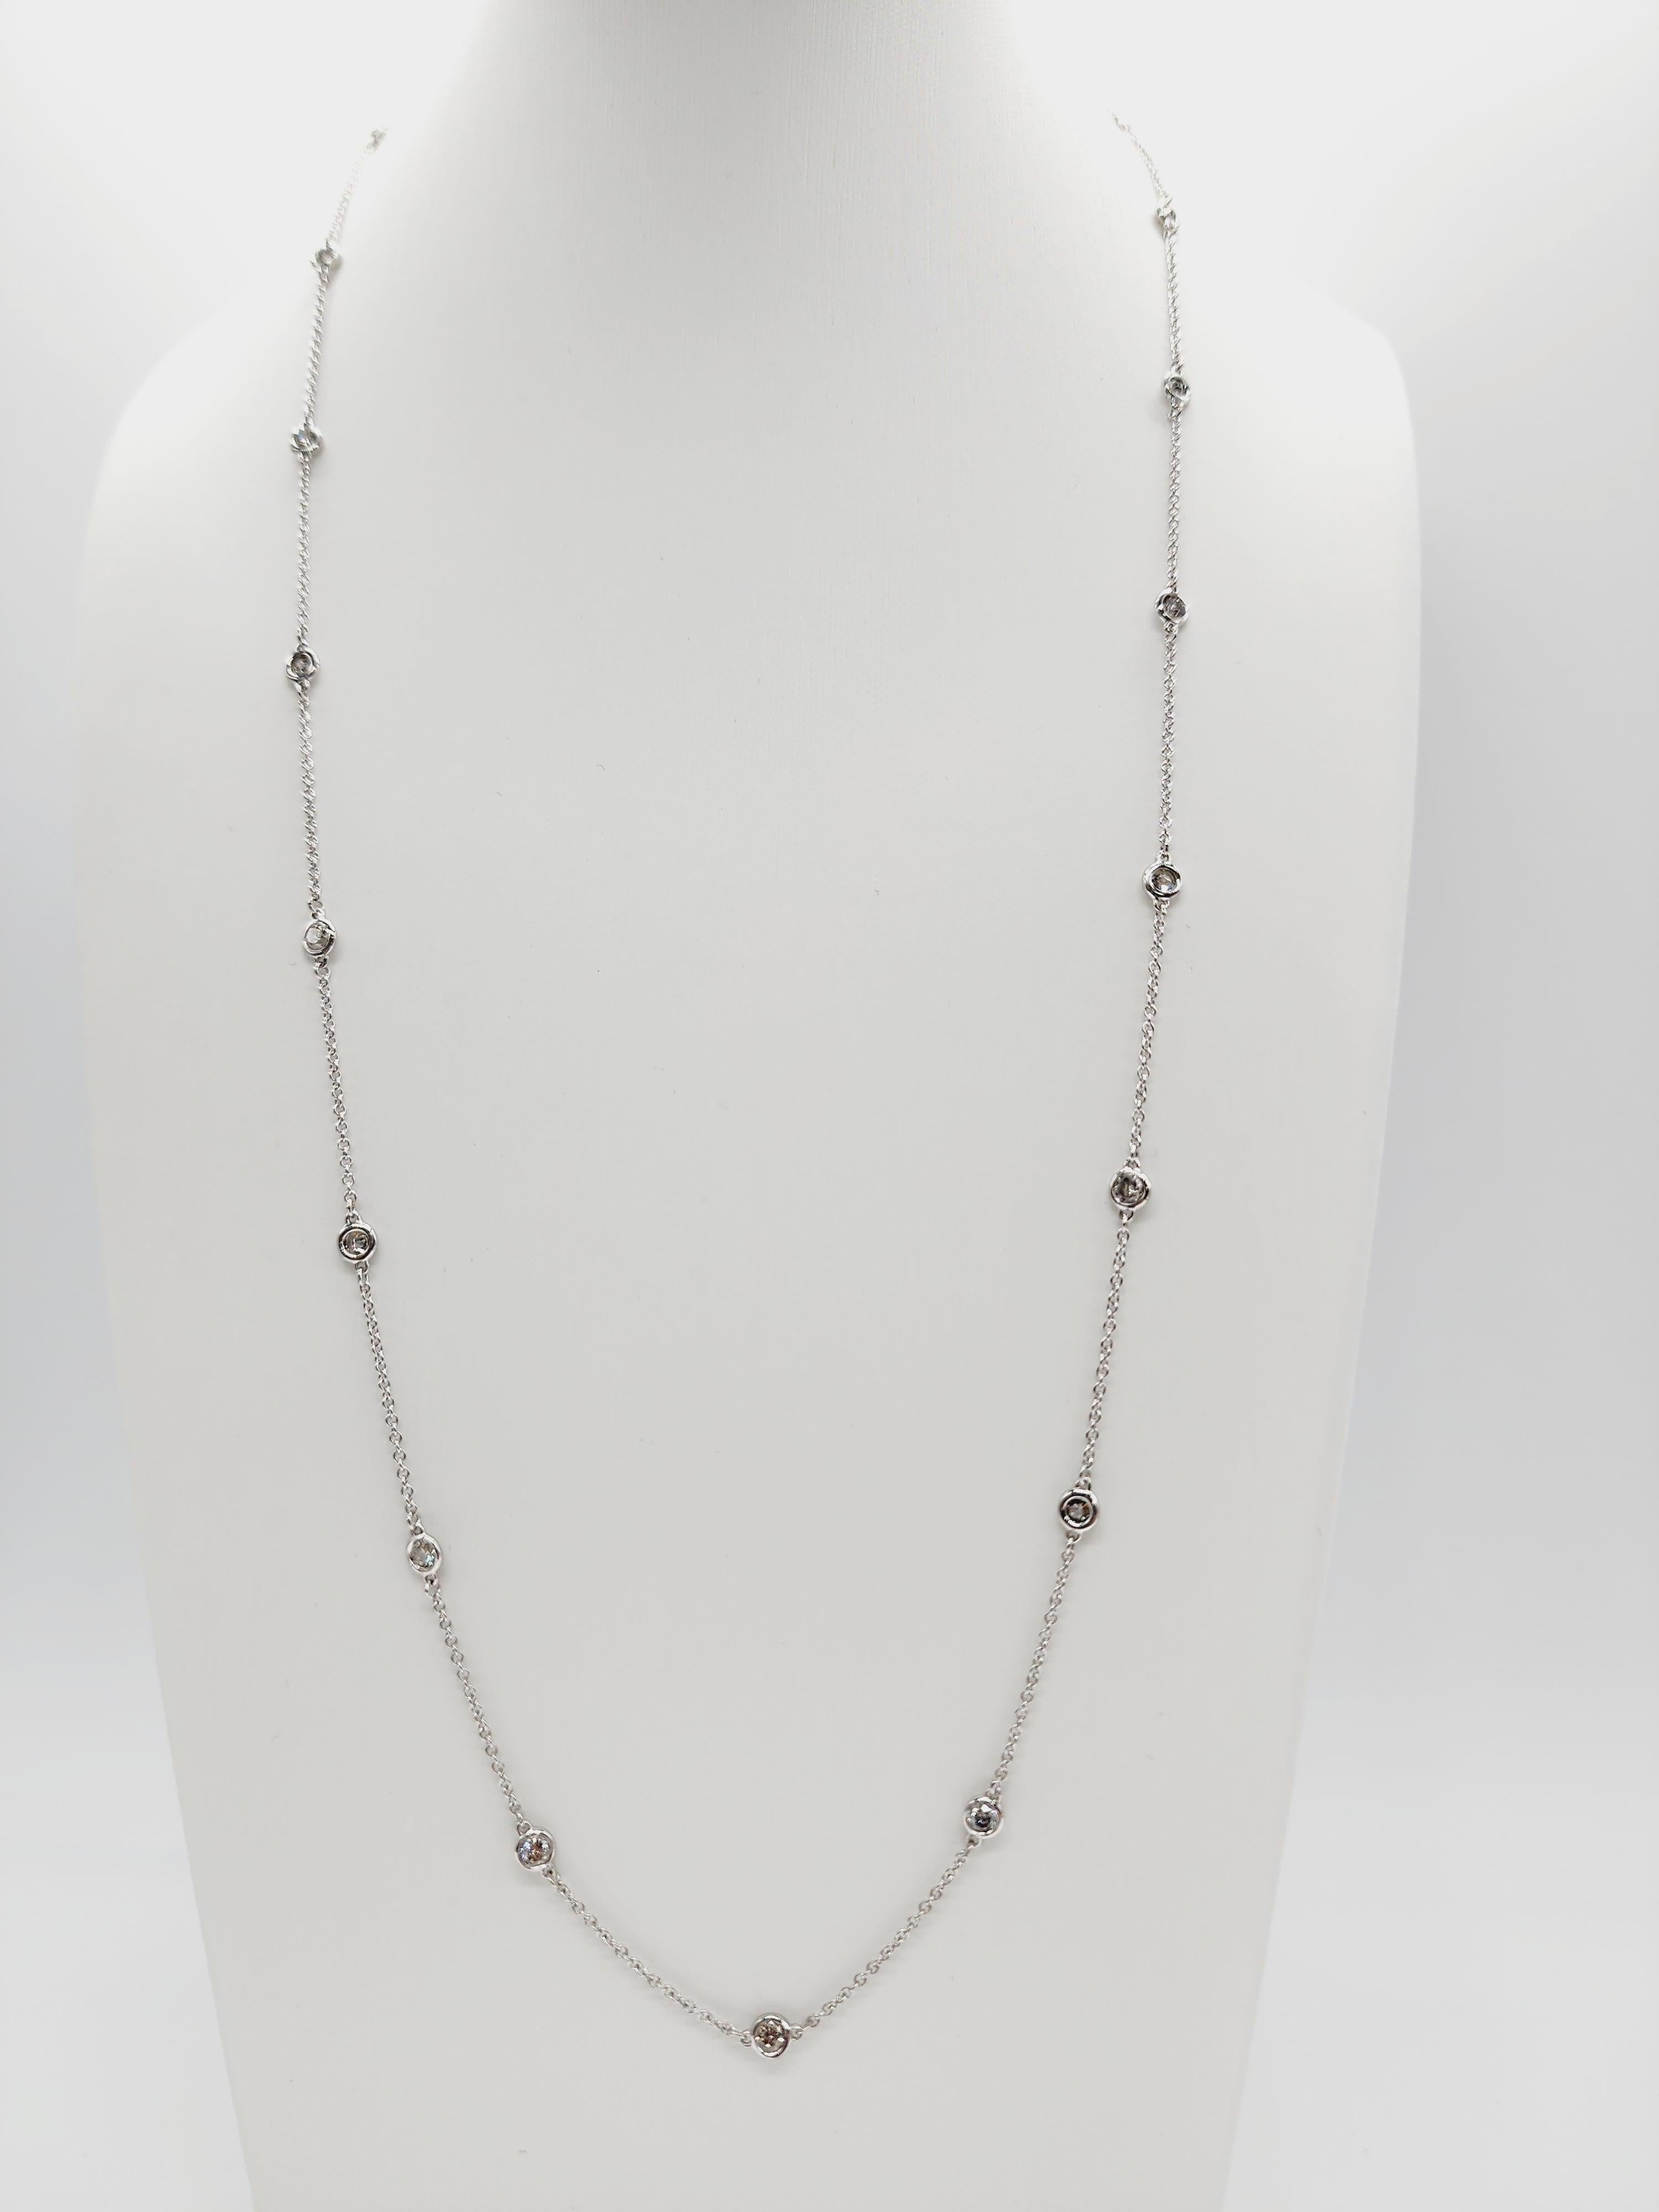 19 Station Diamond by the yard necklace set in Italian made 14K white gold. 
The total weight is 1.55 carats. The total length is 24 inch. Average G-I.